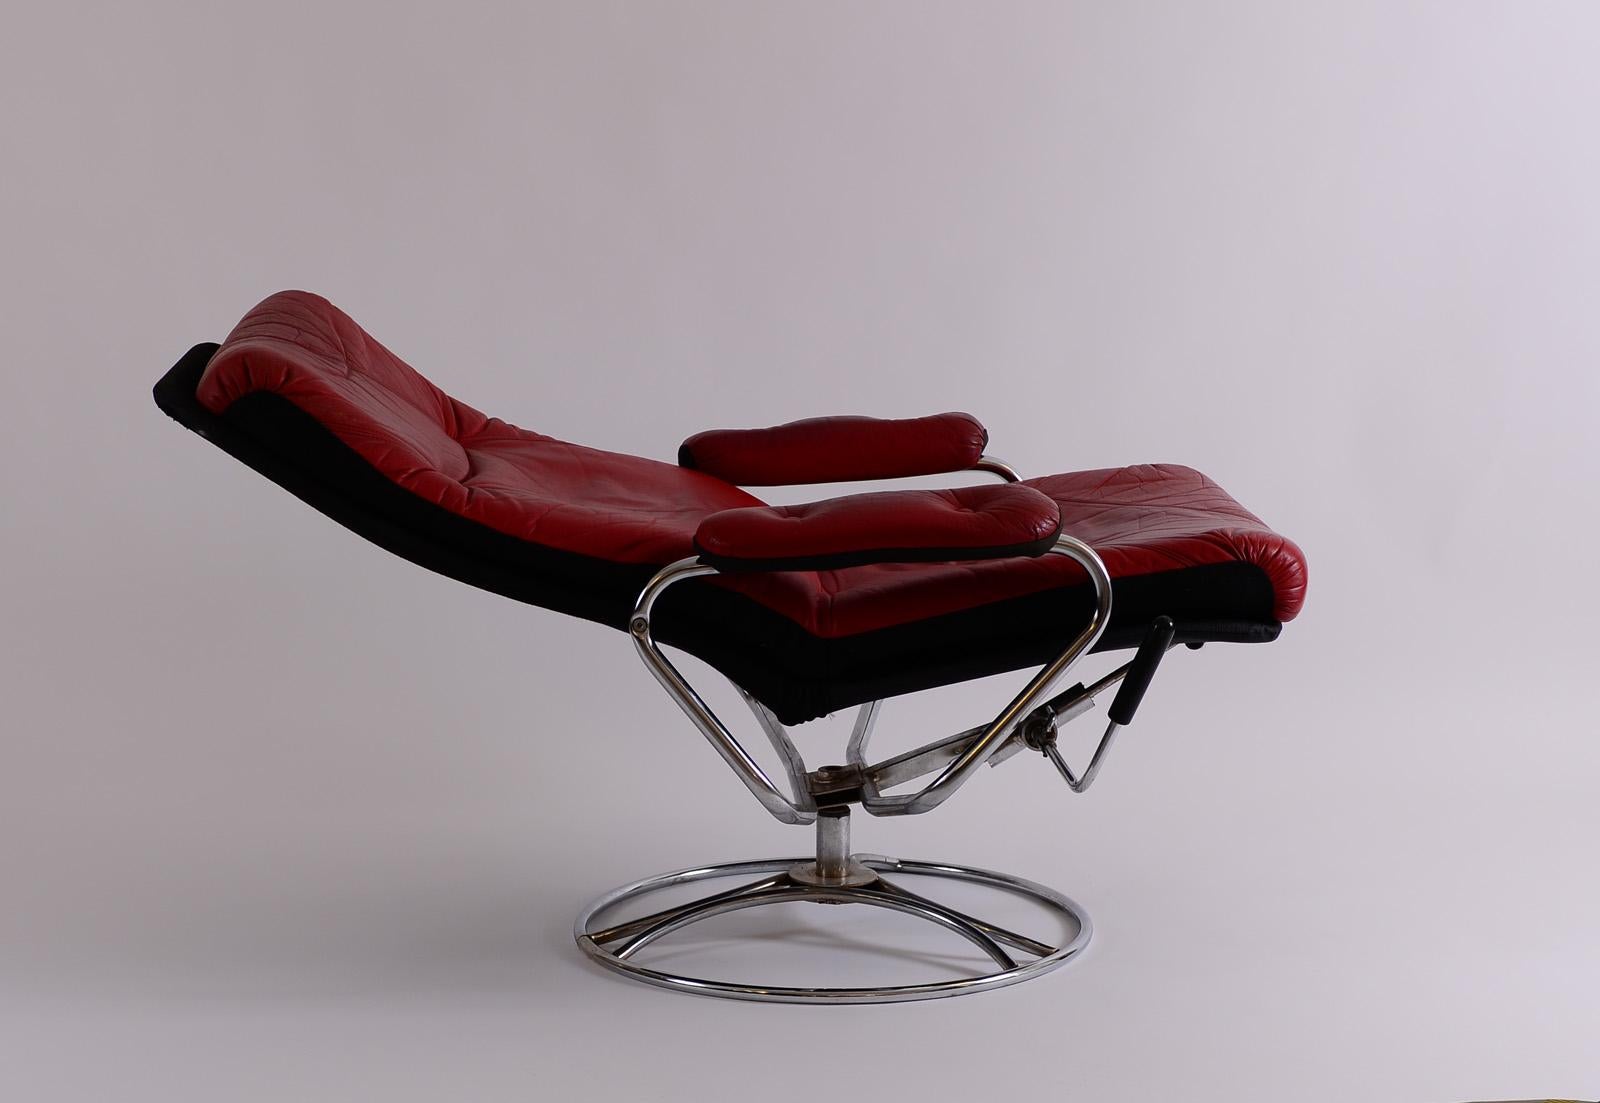 Hand-Crafted Original Mid-Century Modern Predecessor of the Ekornes Stressless Lounge Chair For Sale